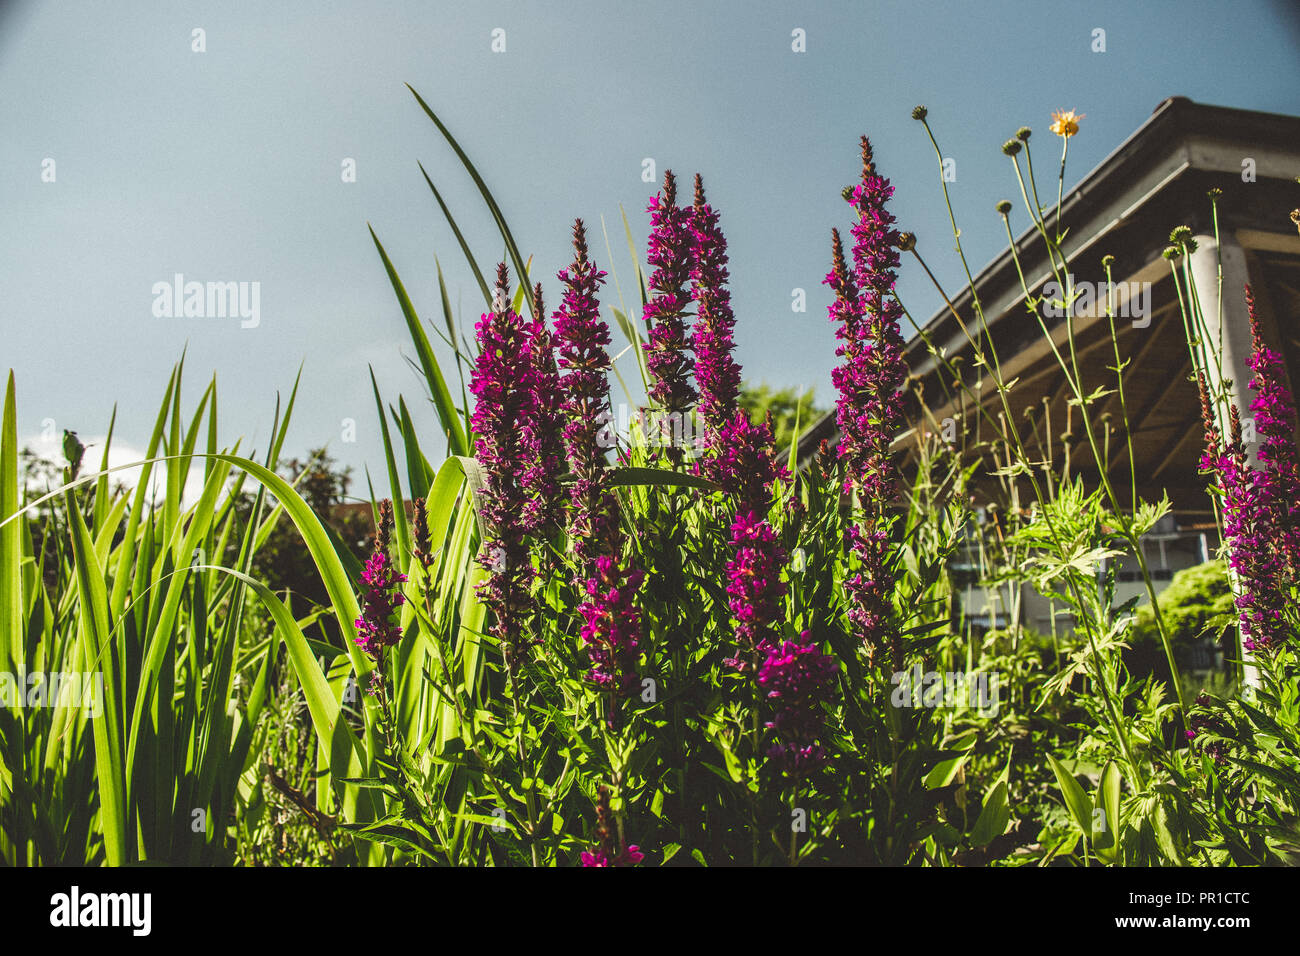 Purple flowers in grass and building behind them Stock Photo